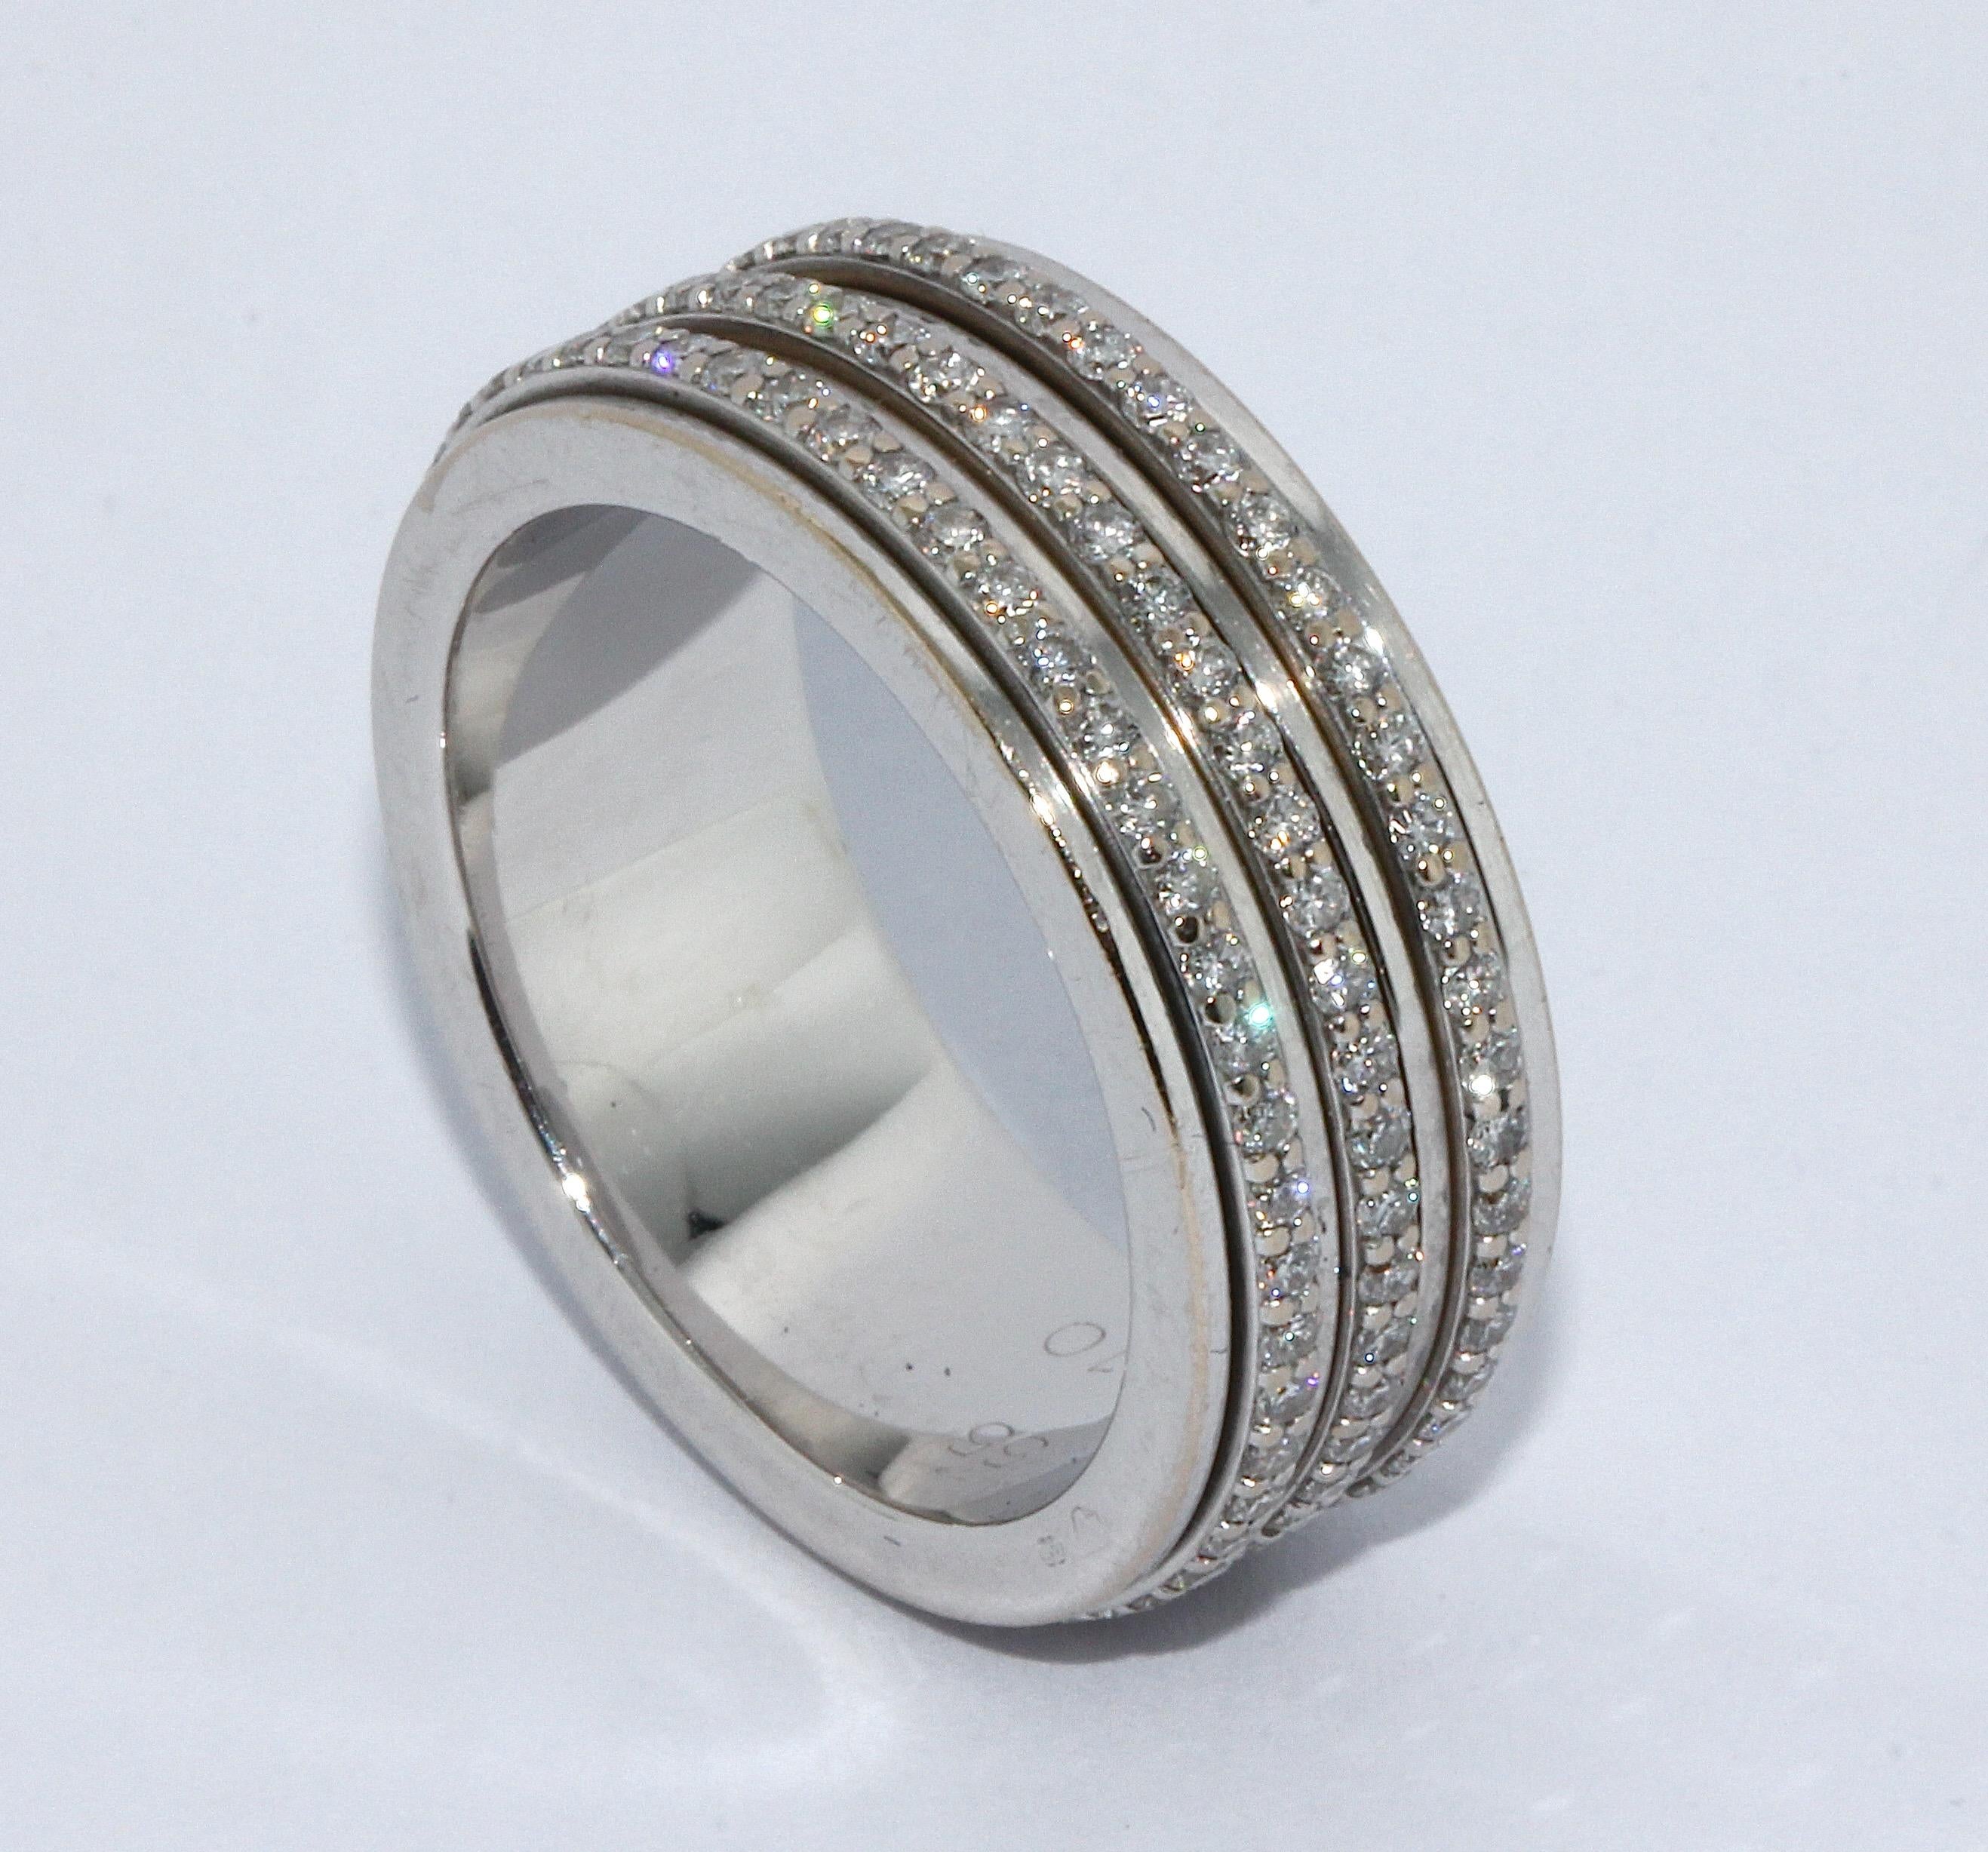 Ladies ring Piaget Possession in 18 carat white gold with 1.53 ct diamonds.

Total 1.53 ct
Top Wesselton
VVSI

Ring Size 55 (US 7 1/4)

Weight: 11.65 gram

Including original case and certificate of authenticity.